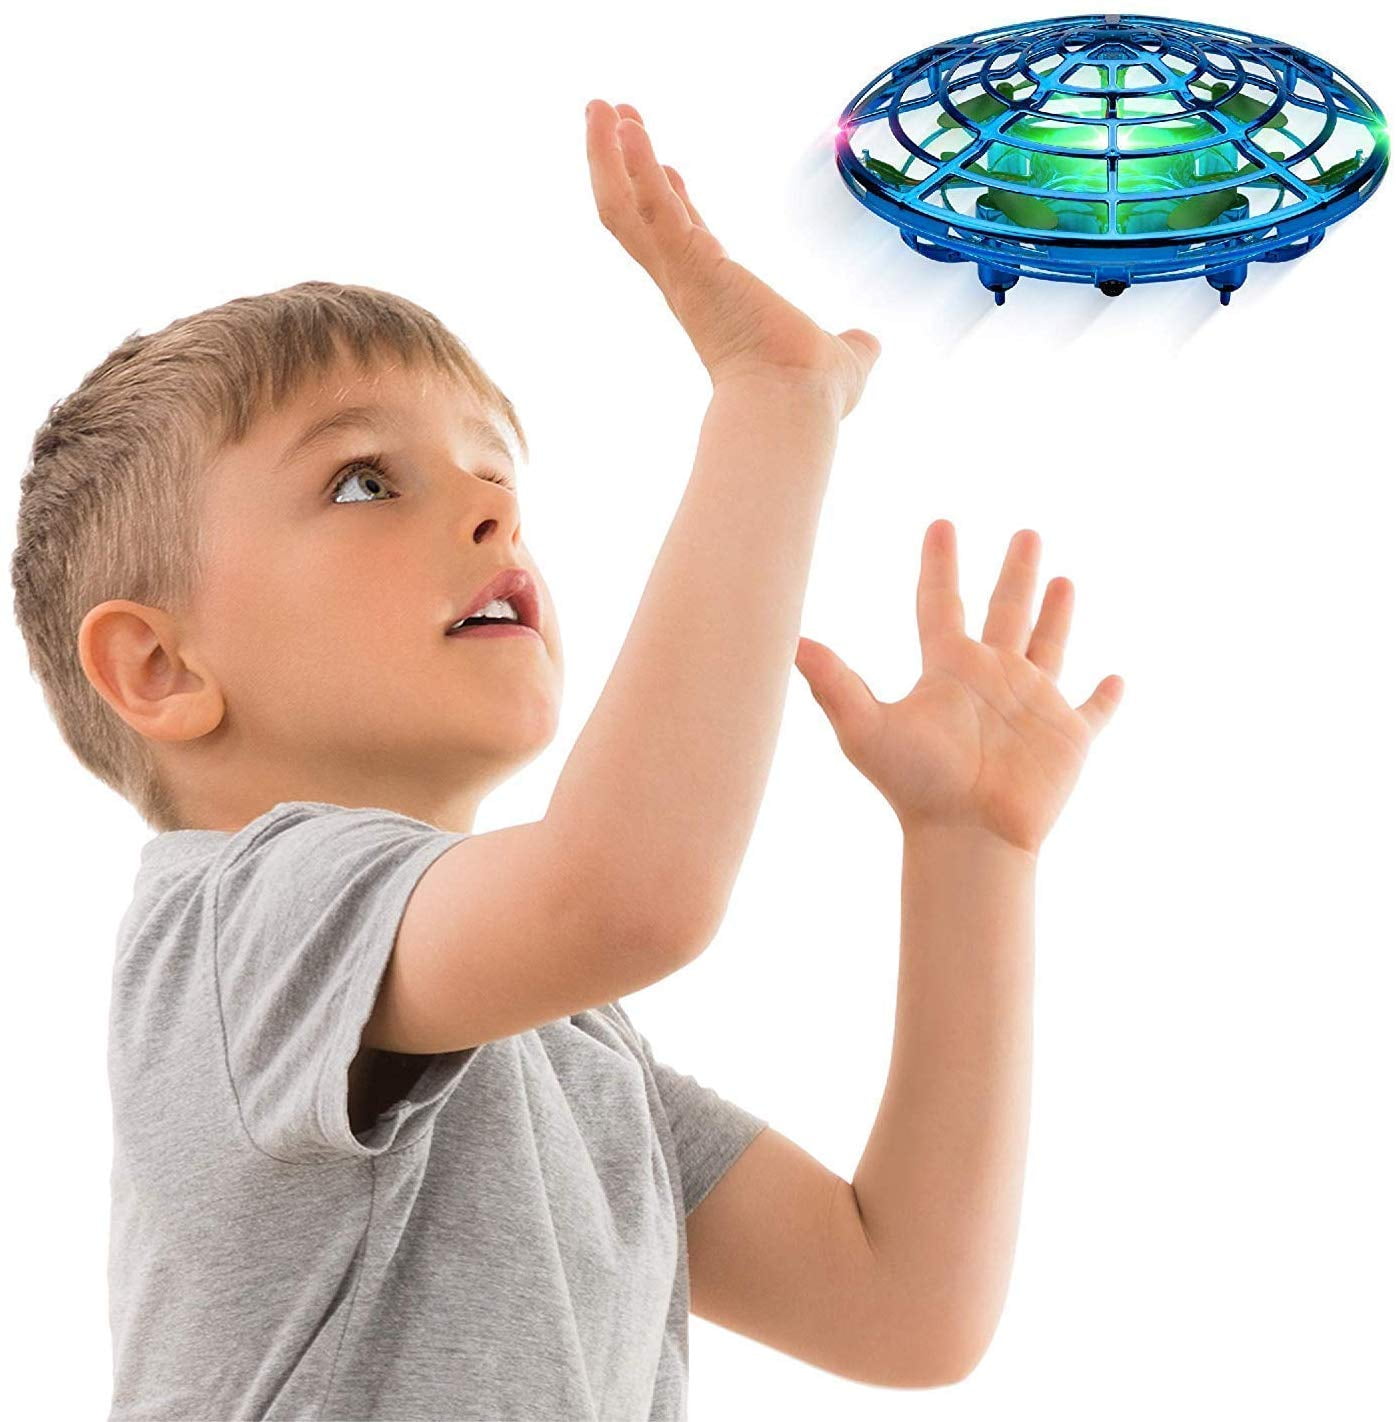 Updated UFO Flying Toys Hand Controlled Flying Ball Drone Helicopter Toys for Kids Jresboen Mini Drones for Kids, Mini Quadcopter Drone Induction Aircraft Flying Saucer Toy Gift for Boys Girls